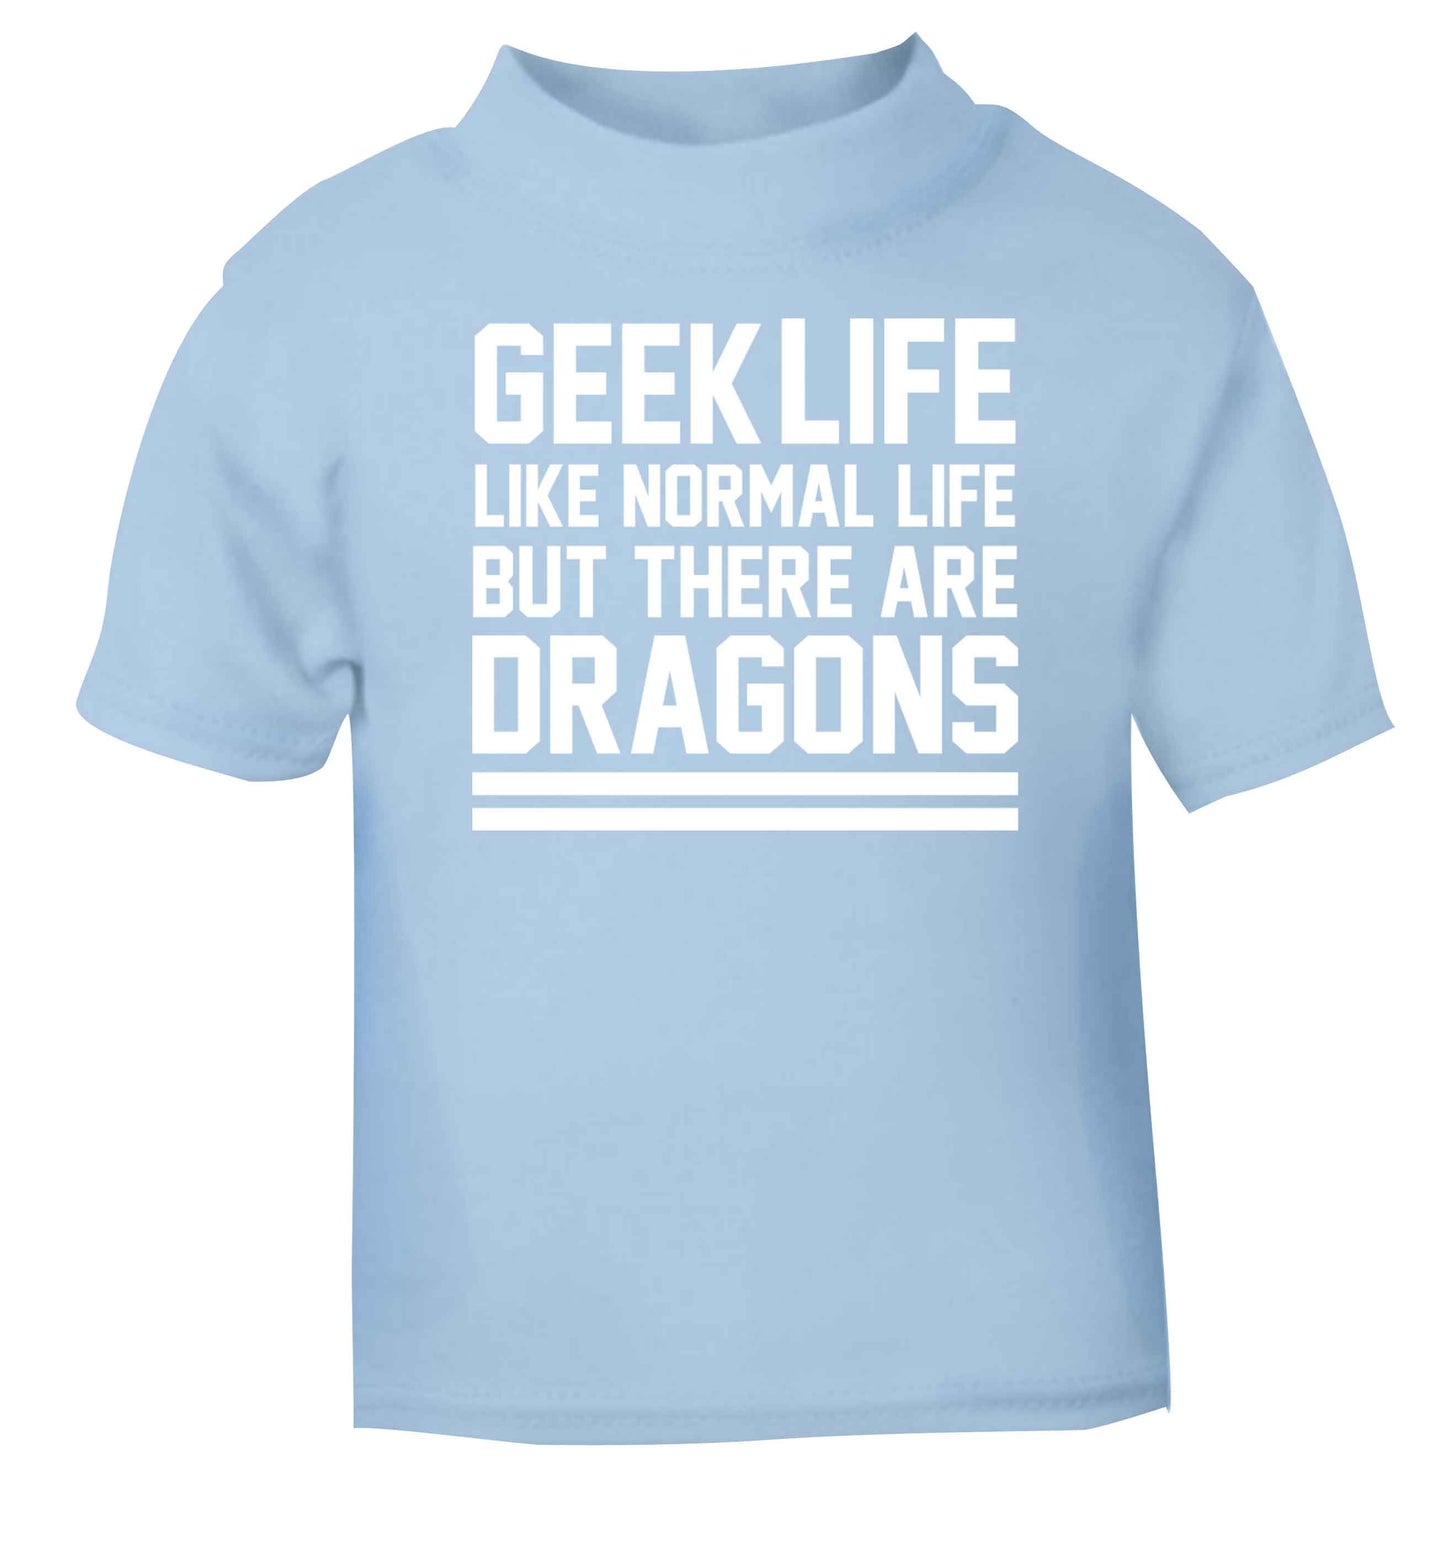 Geek life like normal life but there are dragons light blue baby toddler Tshirt 2 Years